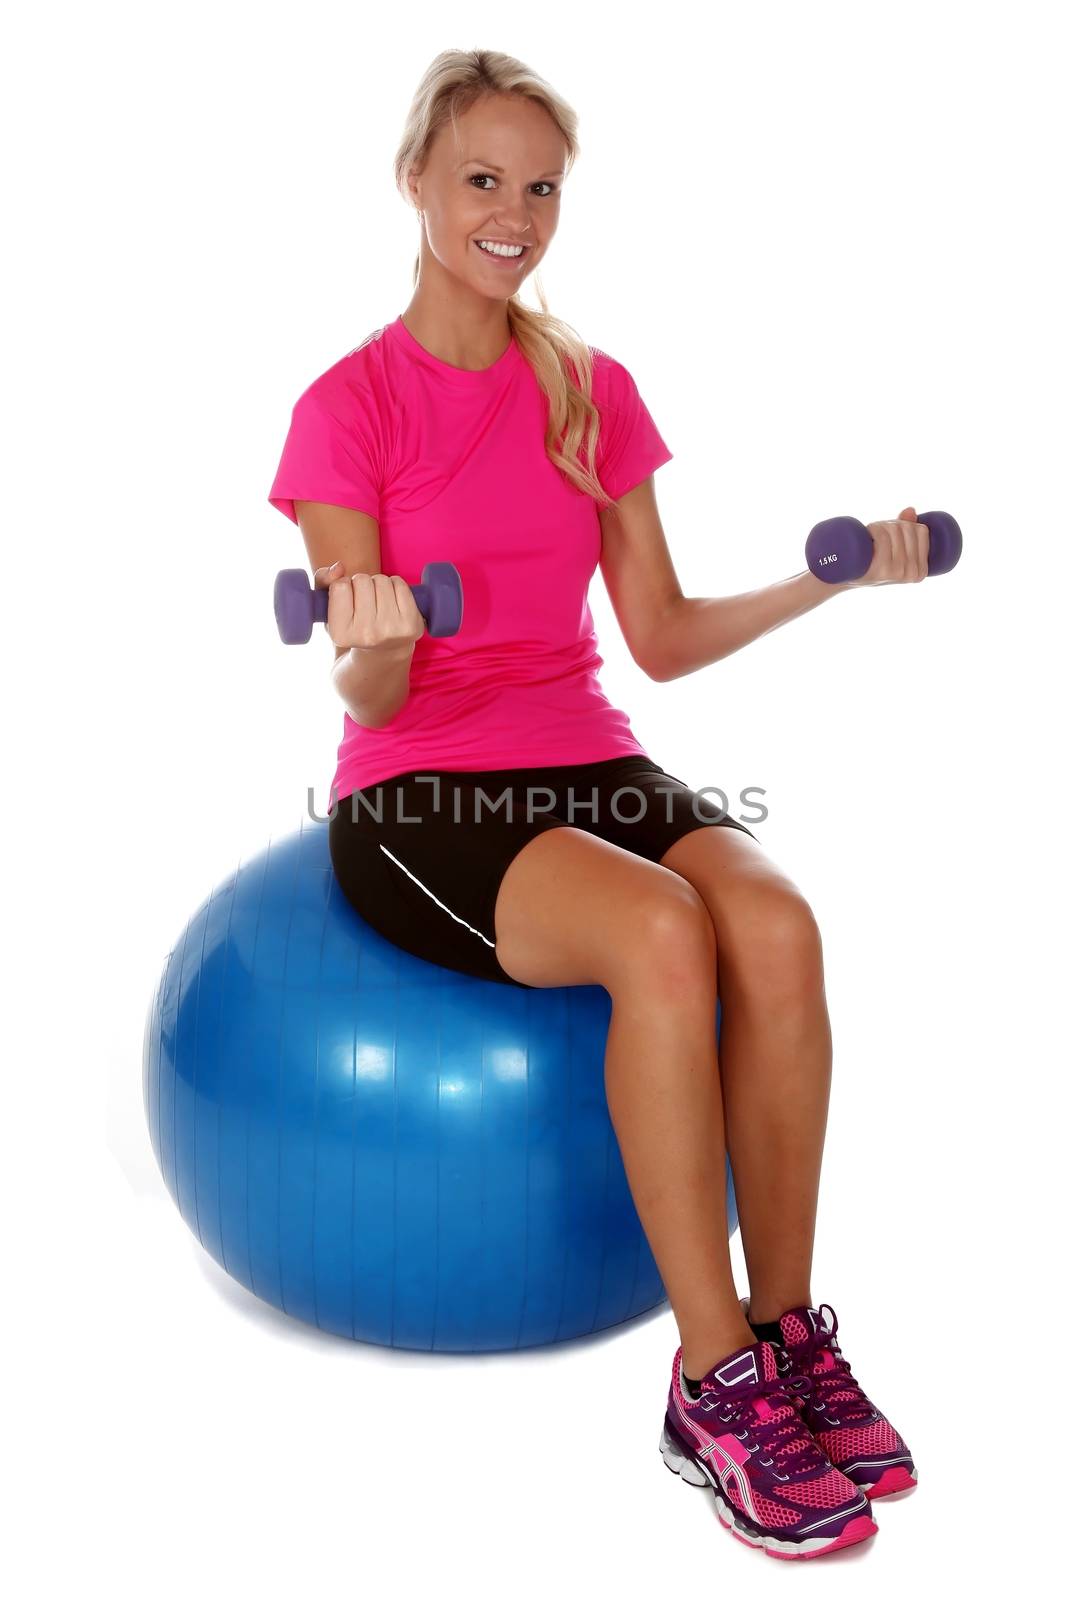 Beautiful young lady doing gym exercises on an inflated rubber ball